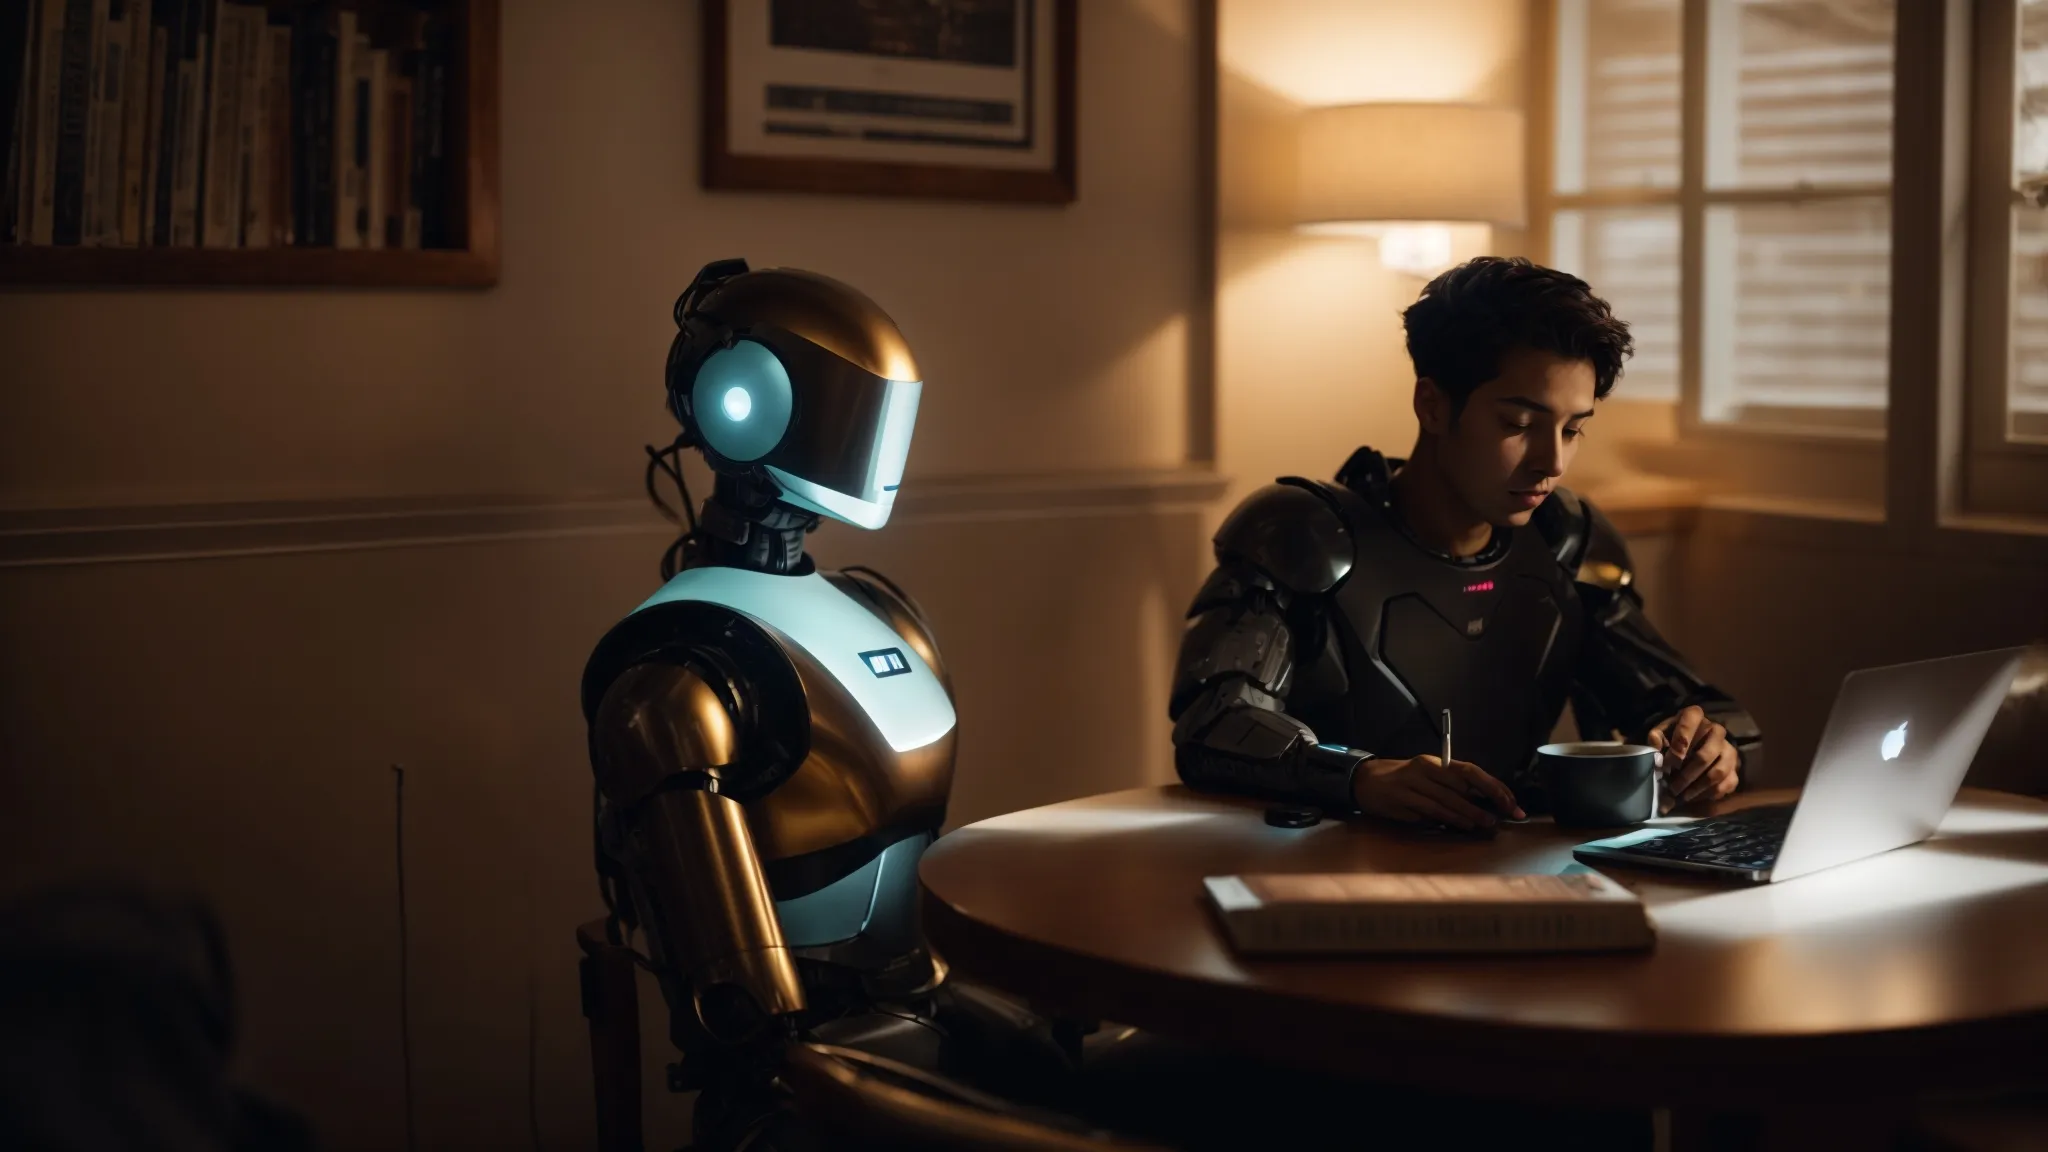 a humanoid robot and a person sit opposite each other at a table, surrounded by books and a laptop, engrossed in a discussion under the soft glow of a lamp.